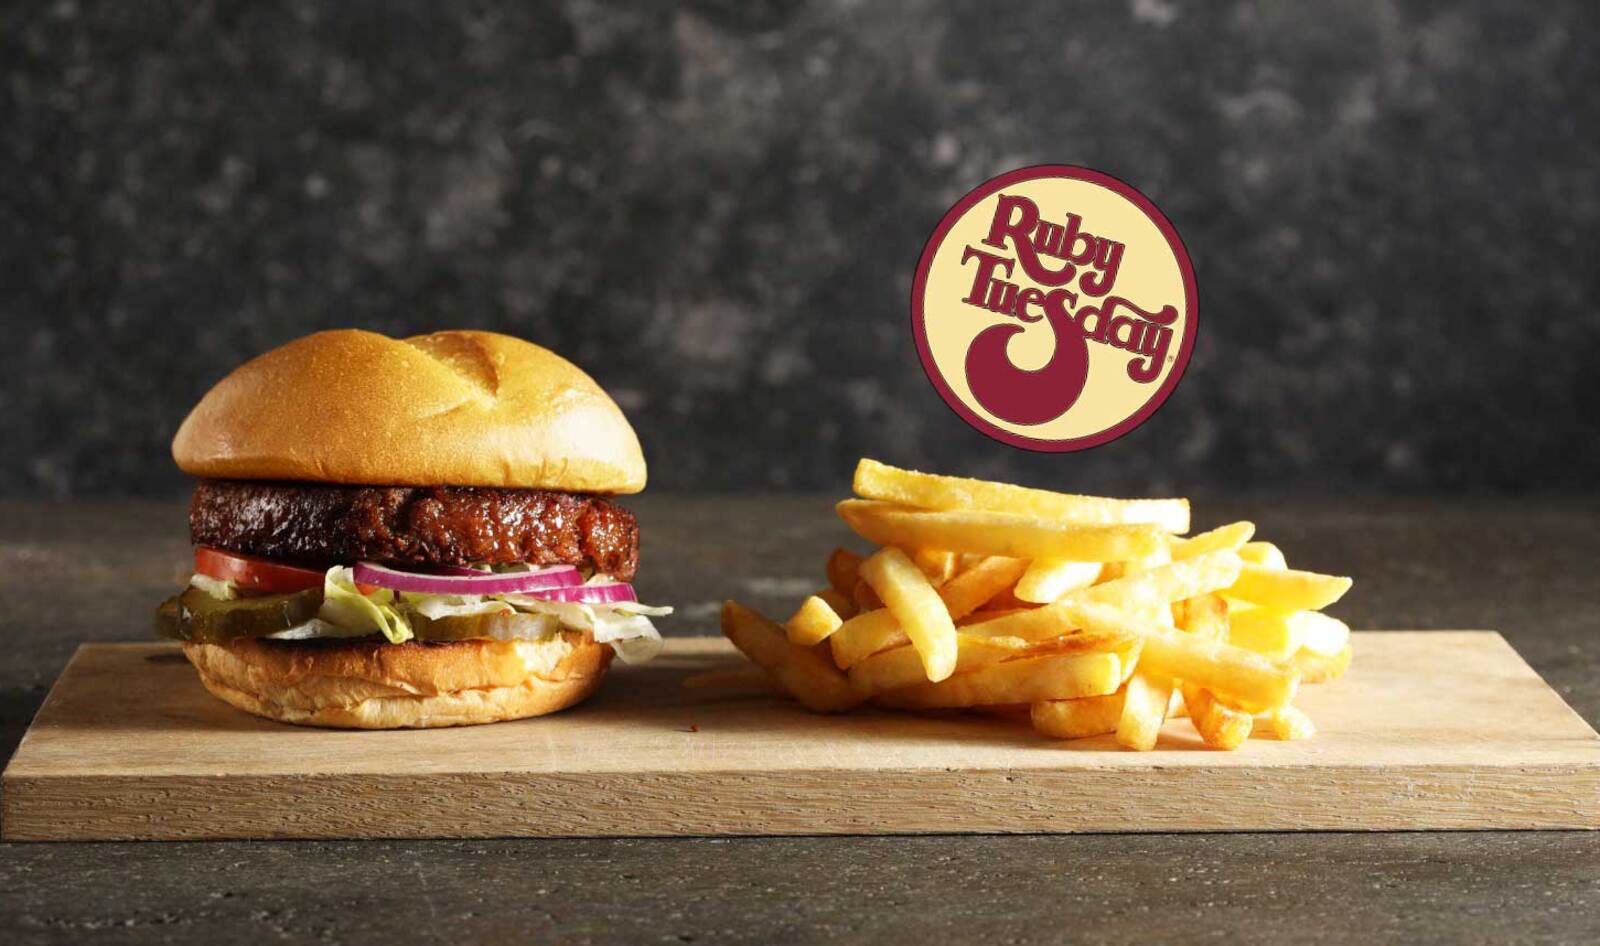 Ruby Tuesday Adds Vegan Awesome Burger to Menu at 450 Locations Nationwide